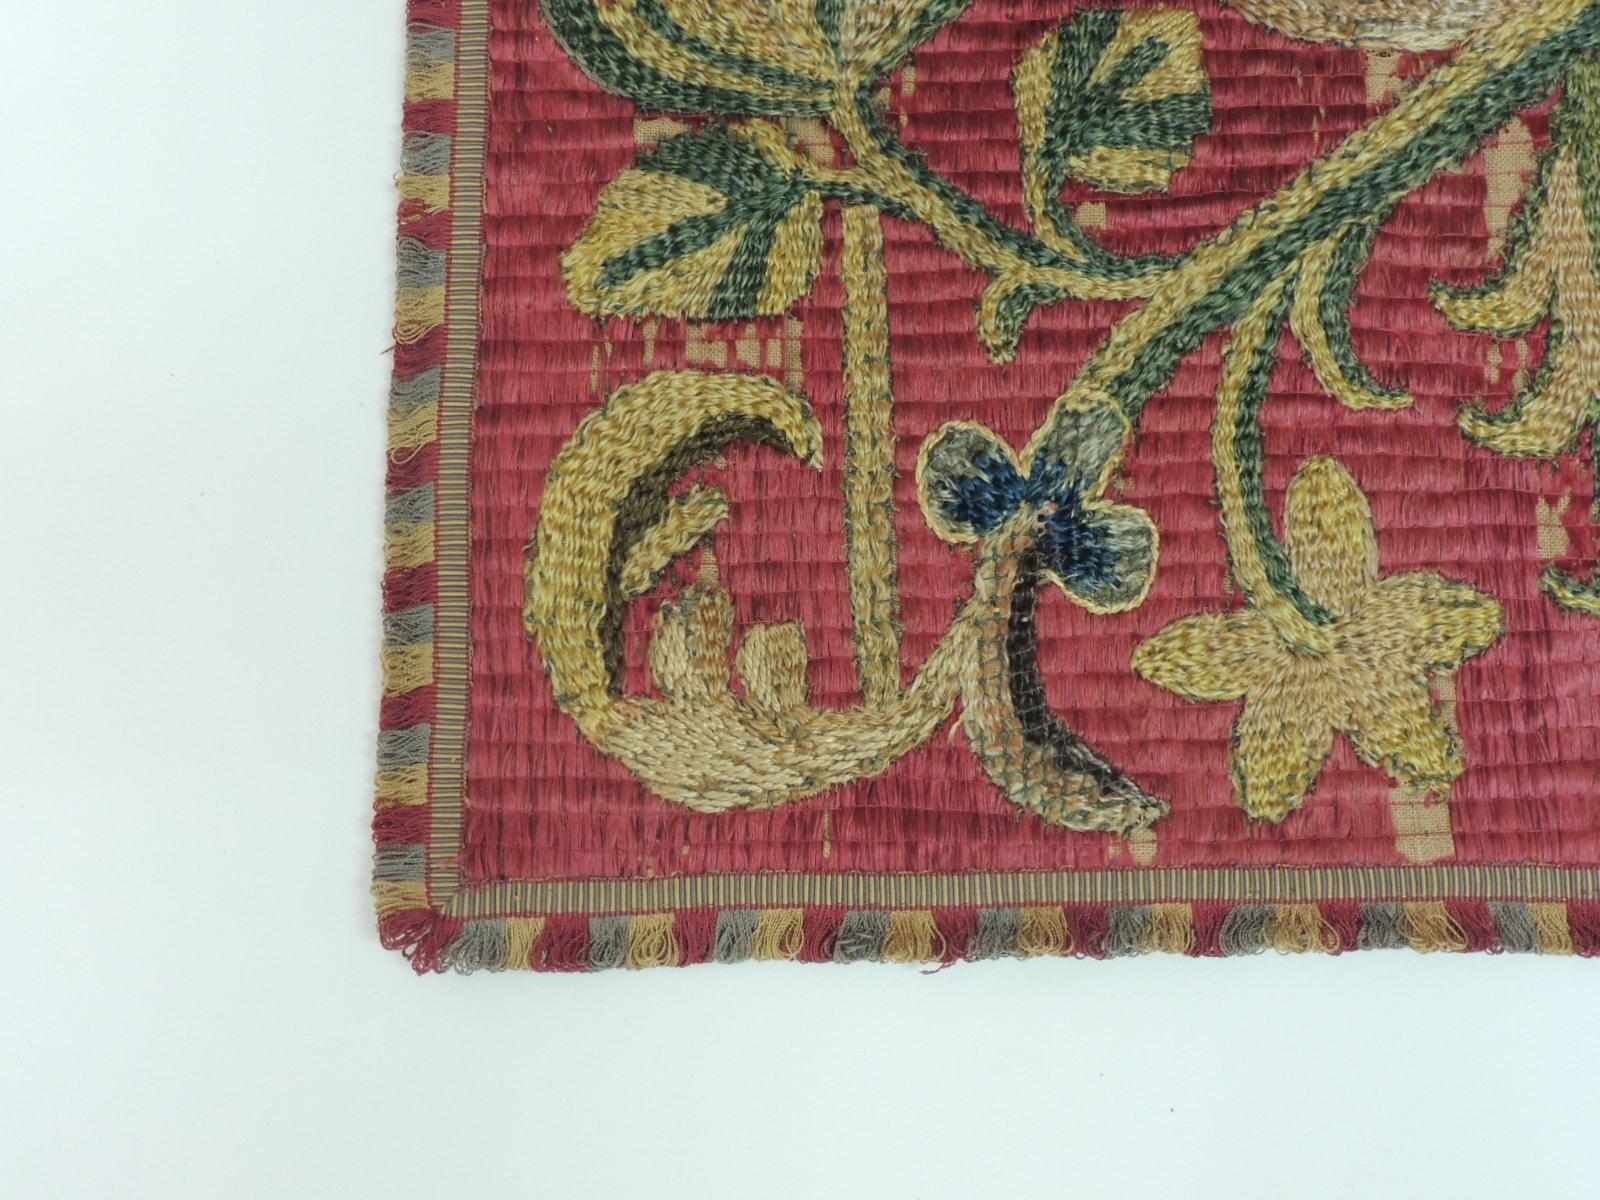 Hollywood Regency Antique Red and Green Italian Silk Floss Threads Embroidery Panel